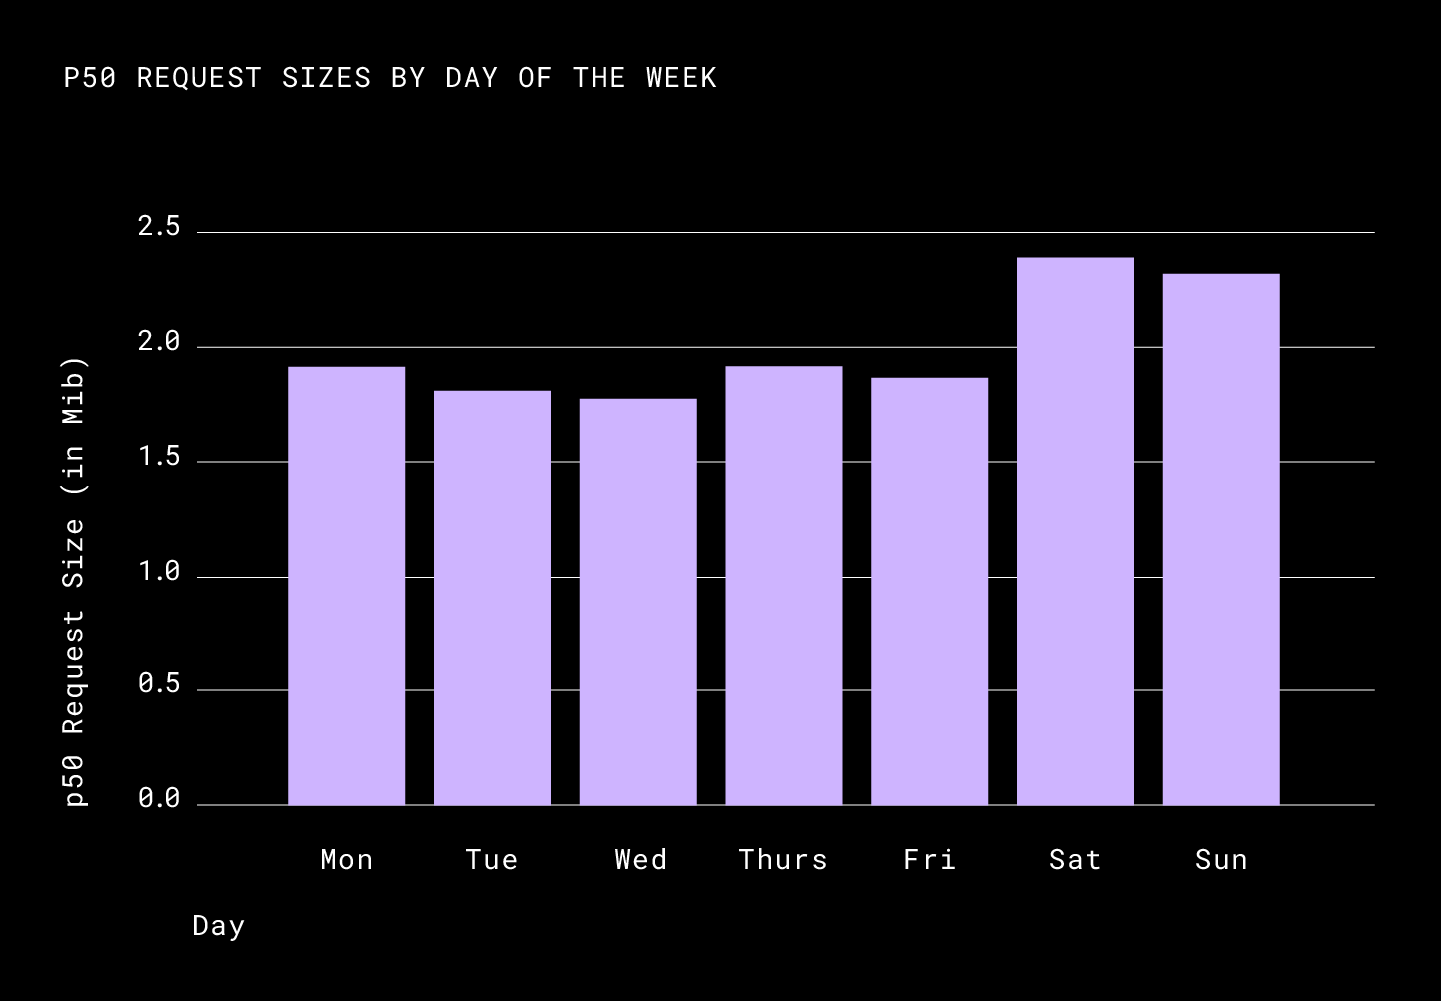 p50 request sizes by day of the week